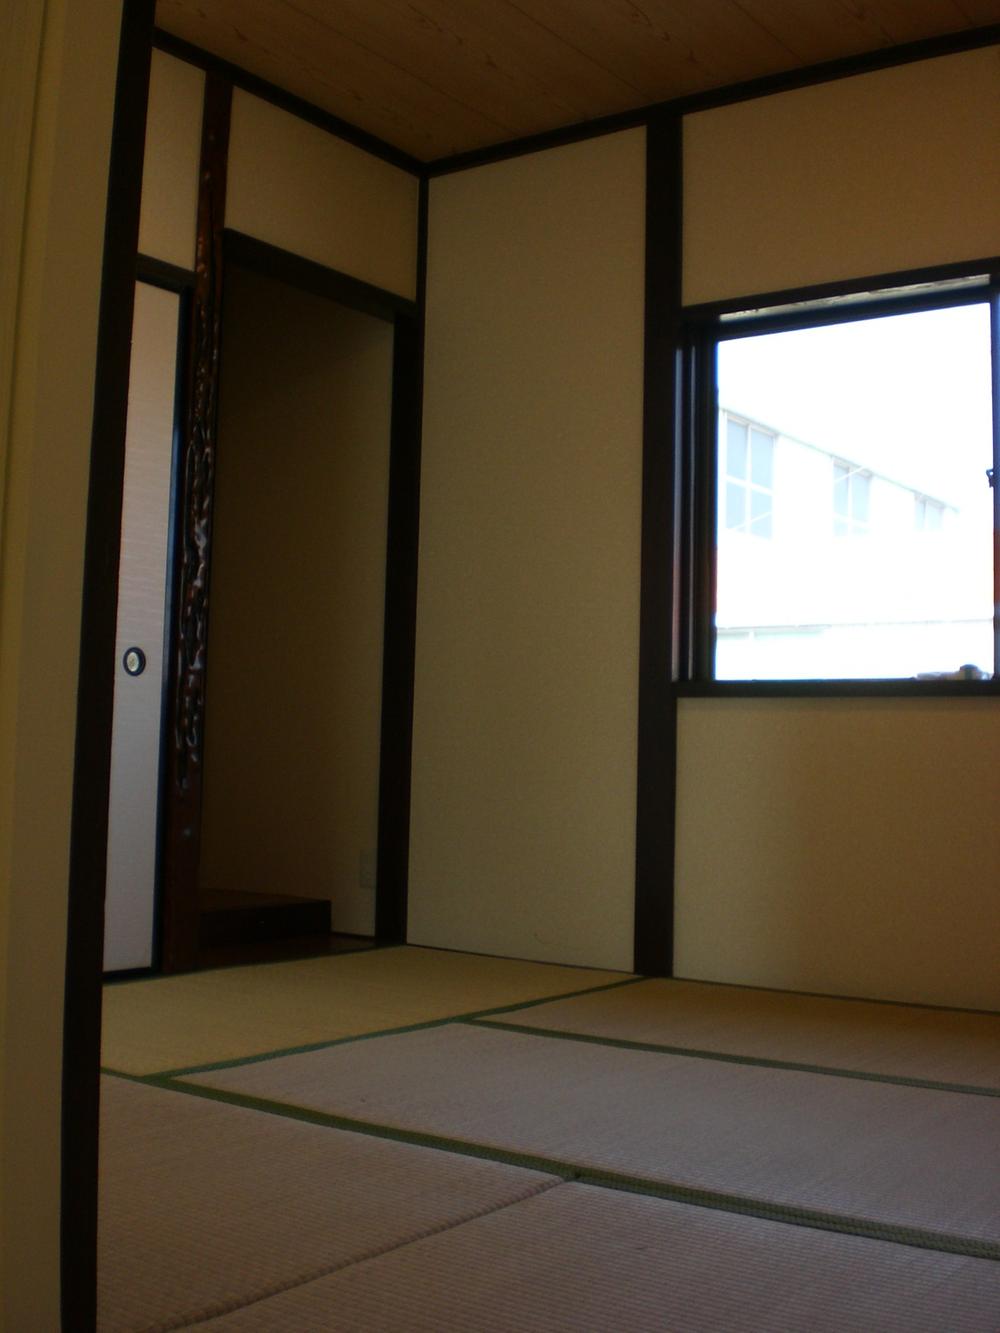 Non-living room. There are Japanese-style room